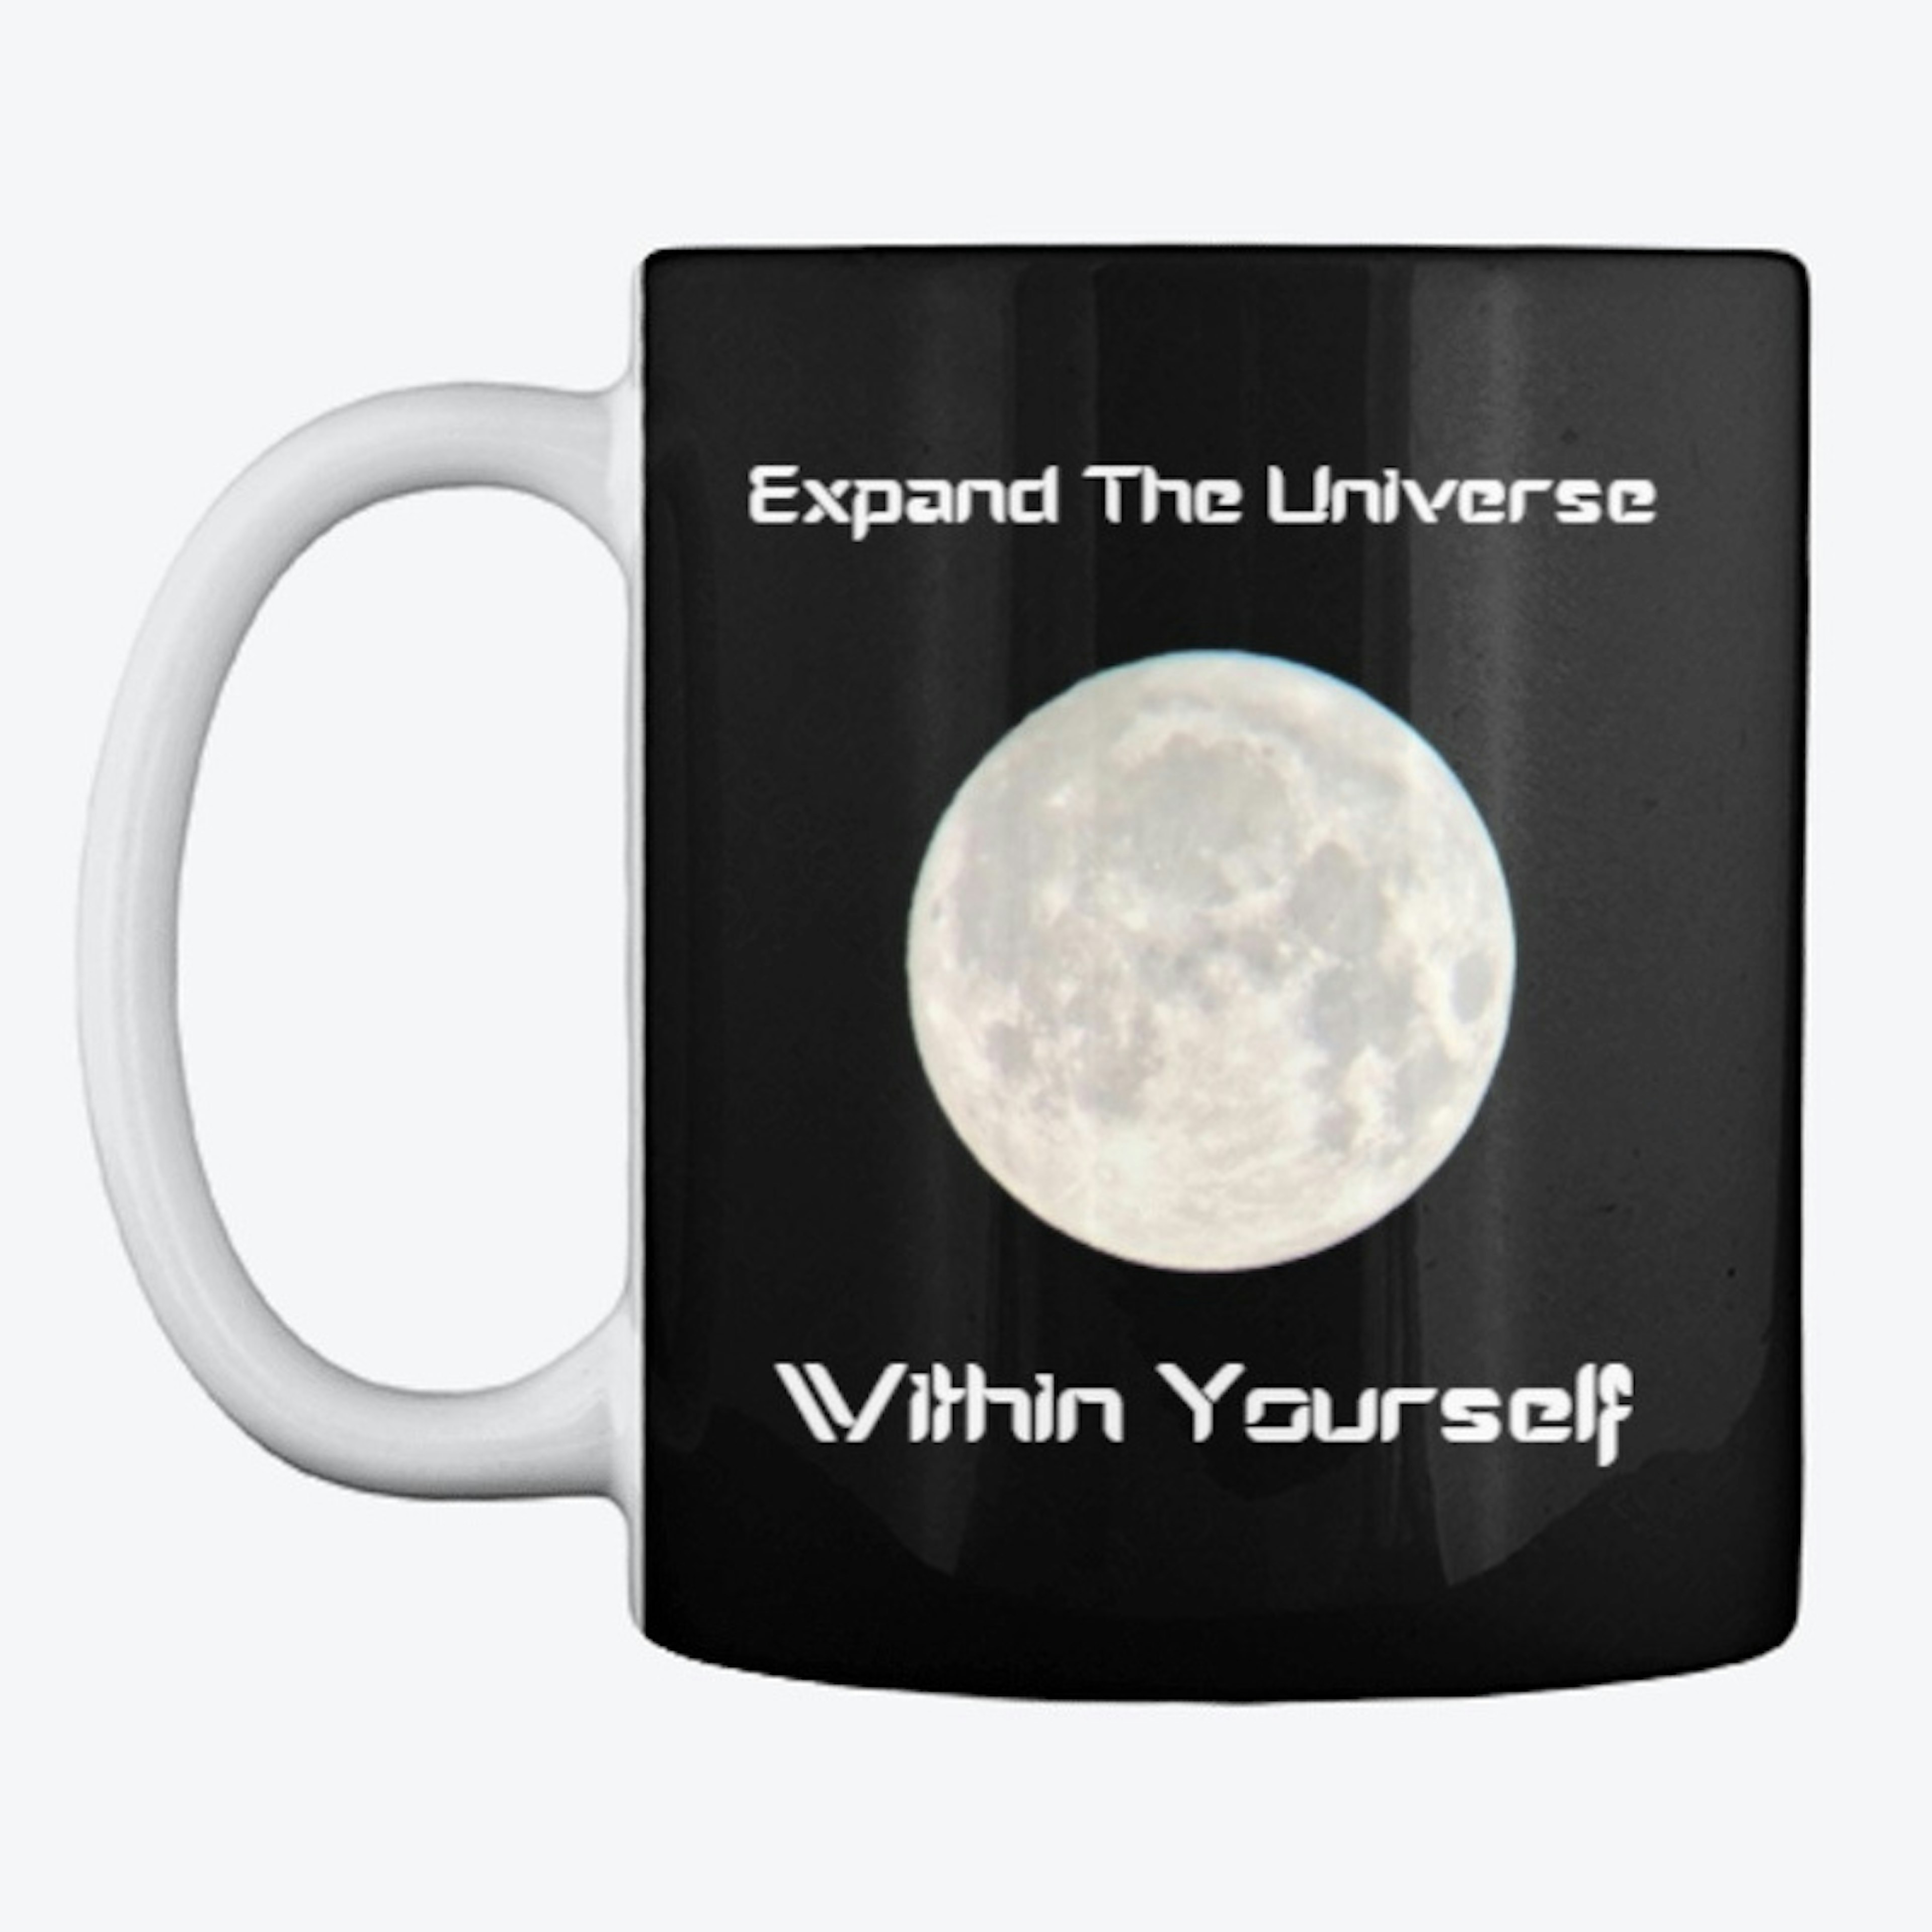 Expand The Universe Within Yourself